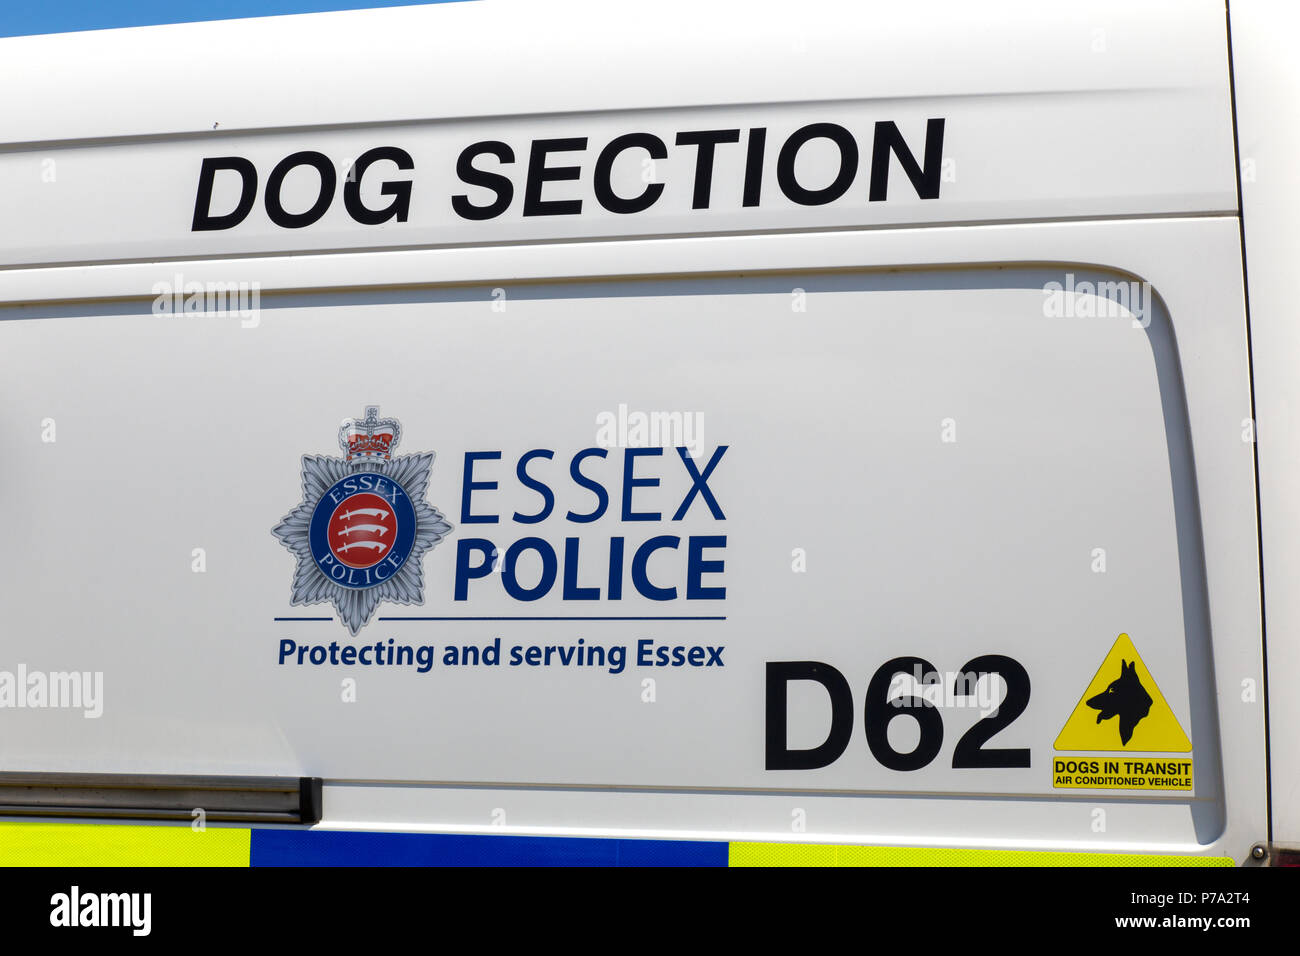 Dog section vehicle, Essex police Stock Photo